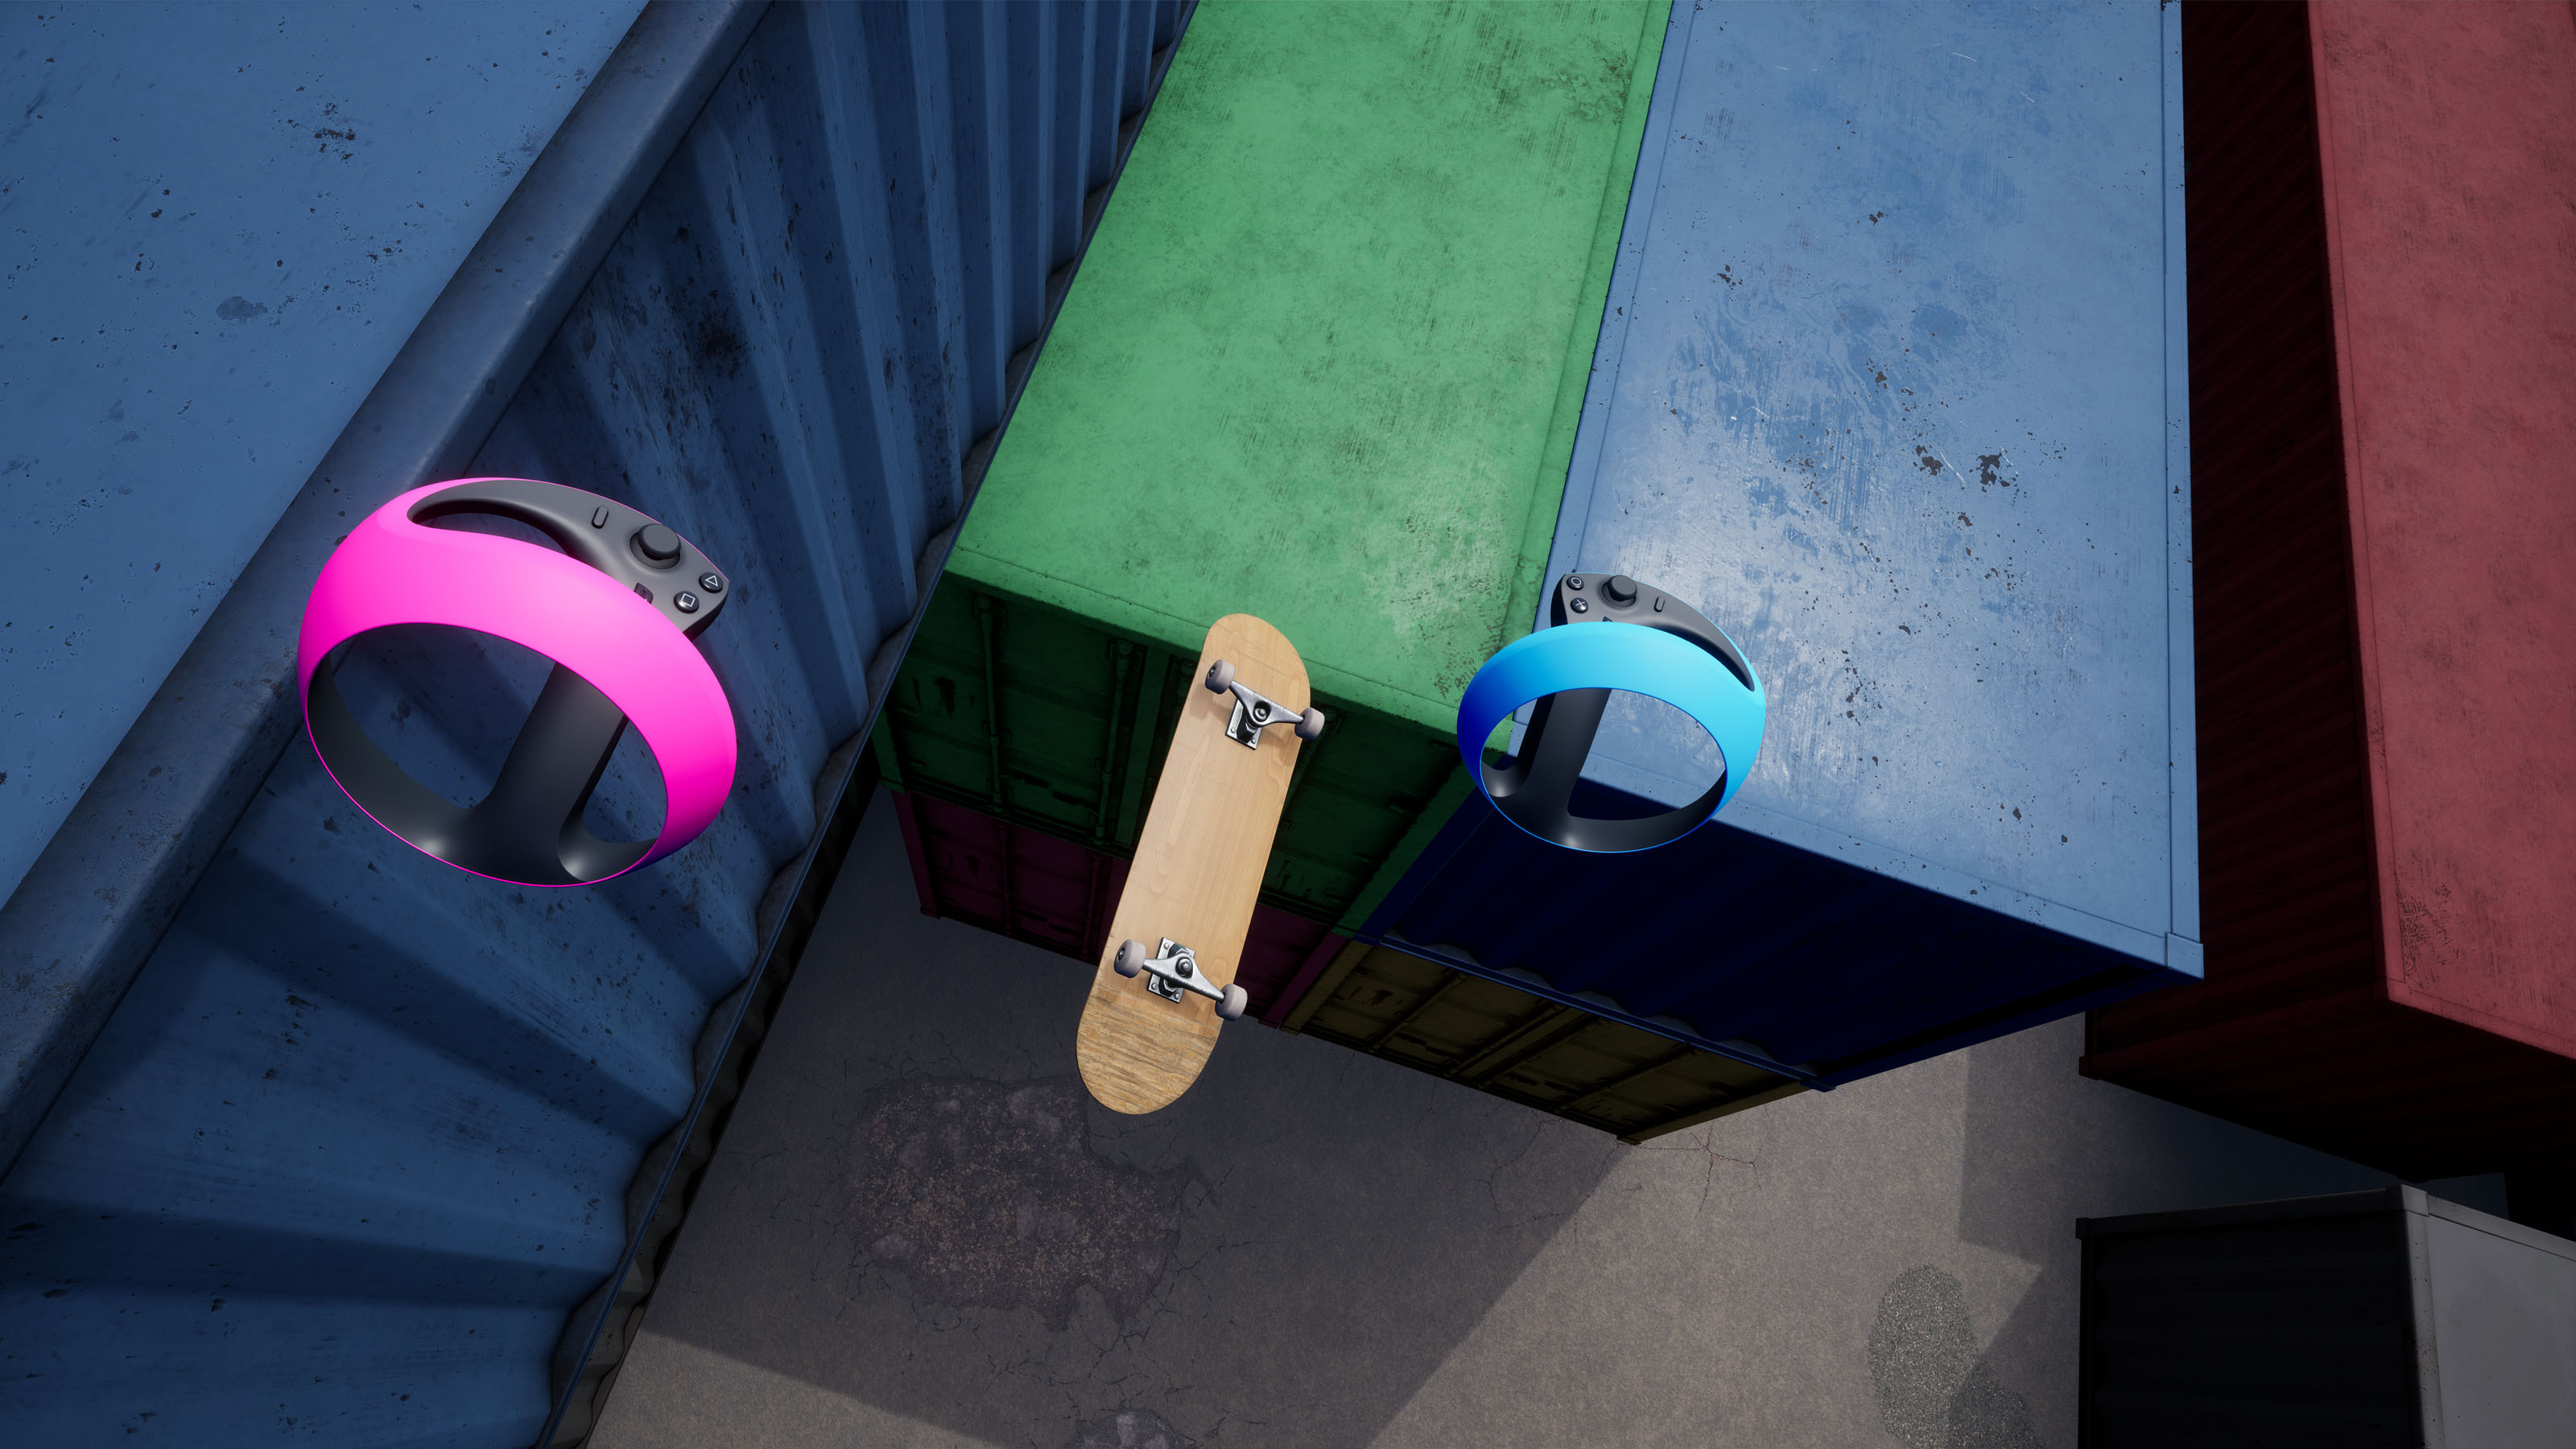 A screenshot from the game VR Skater showing a skateboard jumping over some metal containers and the VR controllers